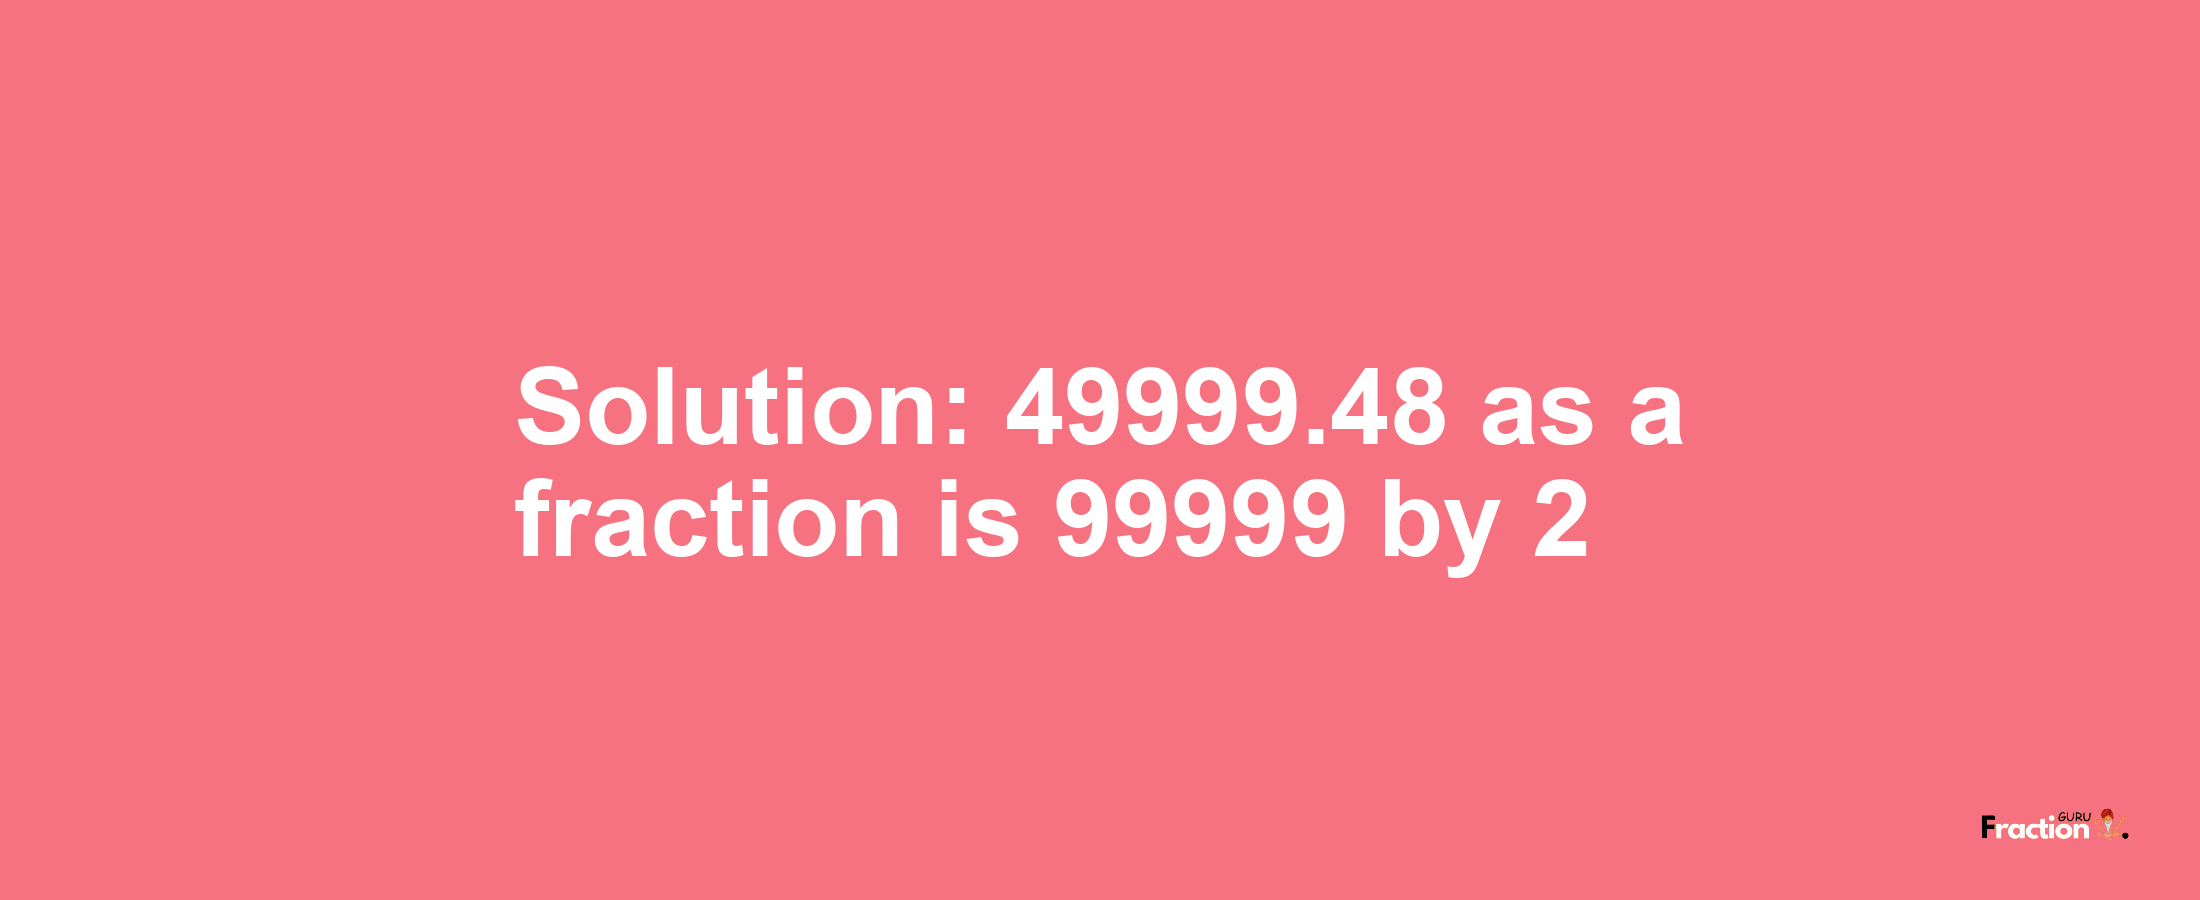 Solution:49999.48 as a fraction is 99999/2